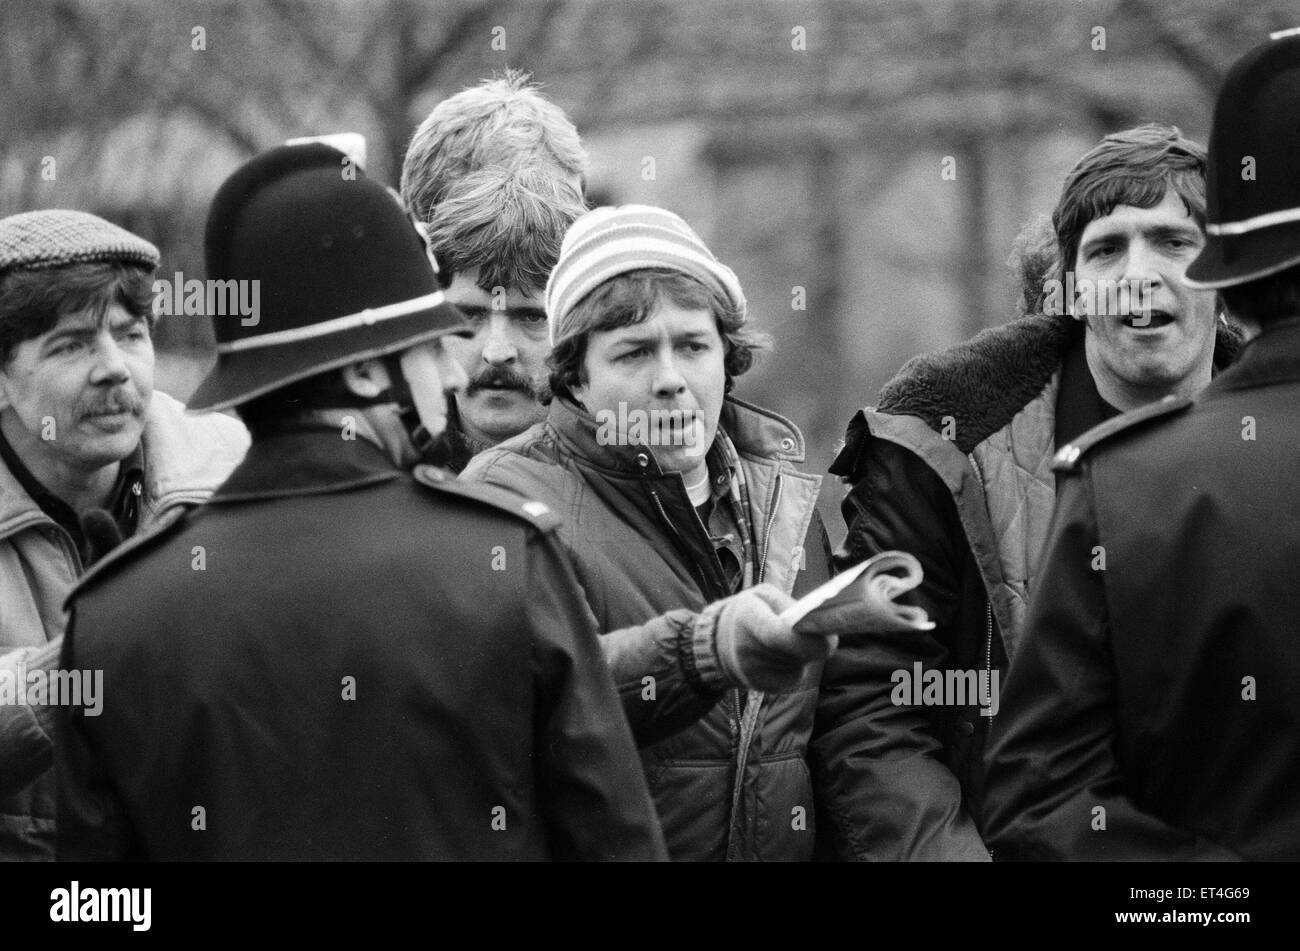 Miners Strike 1984 - 1985, Pictured. Pickets and Police at Lea Hall Colliery, Rugeley, Staffordshire, England, Monday 26th March 1984. Arthur Scargill, president of the NUM, declared that strikes in the various coal fields were to be a national strike and Stock Photo